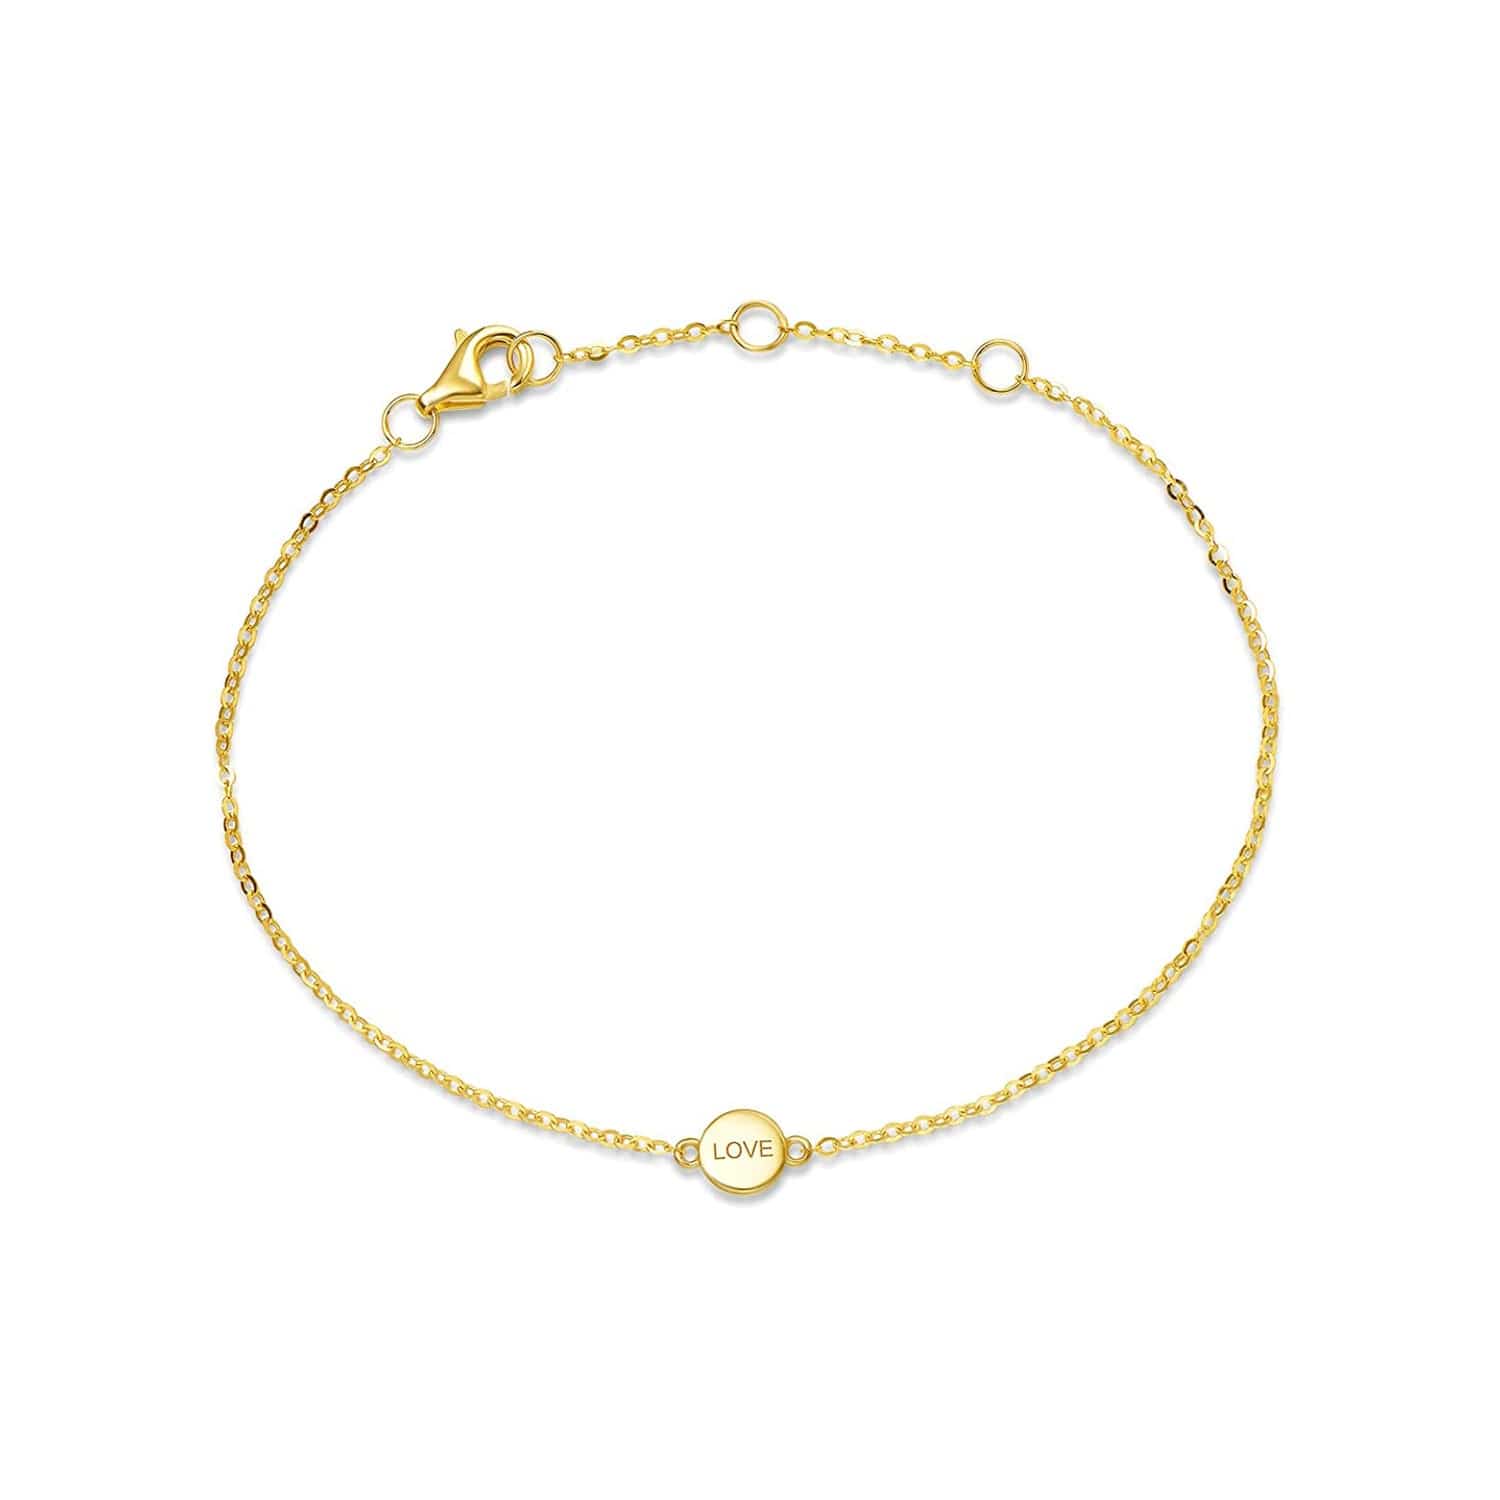 FANCIME "LOVE" 14k Solid Yellow Gold  Round Coin Bracelet Main